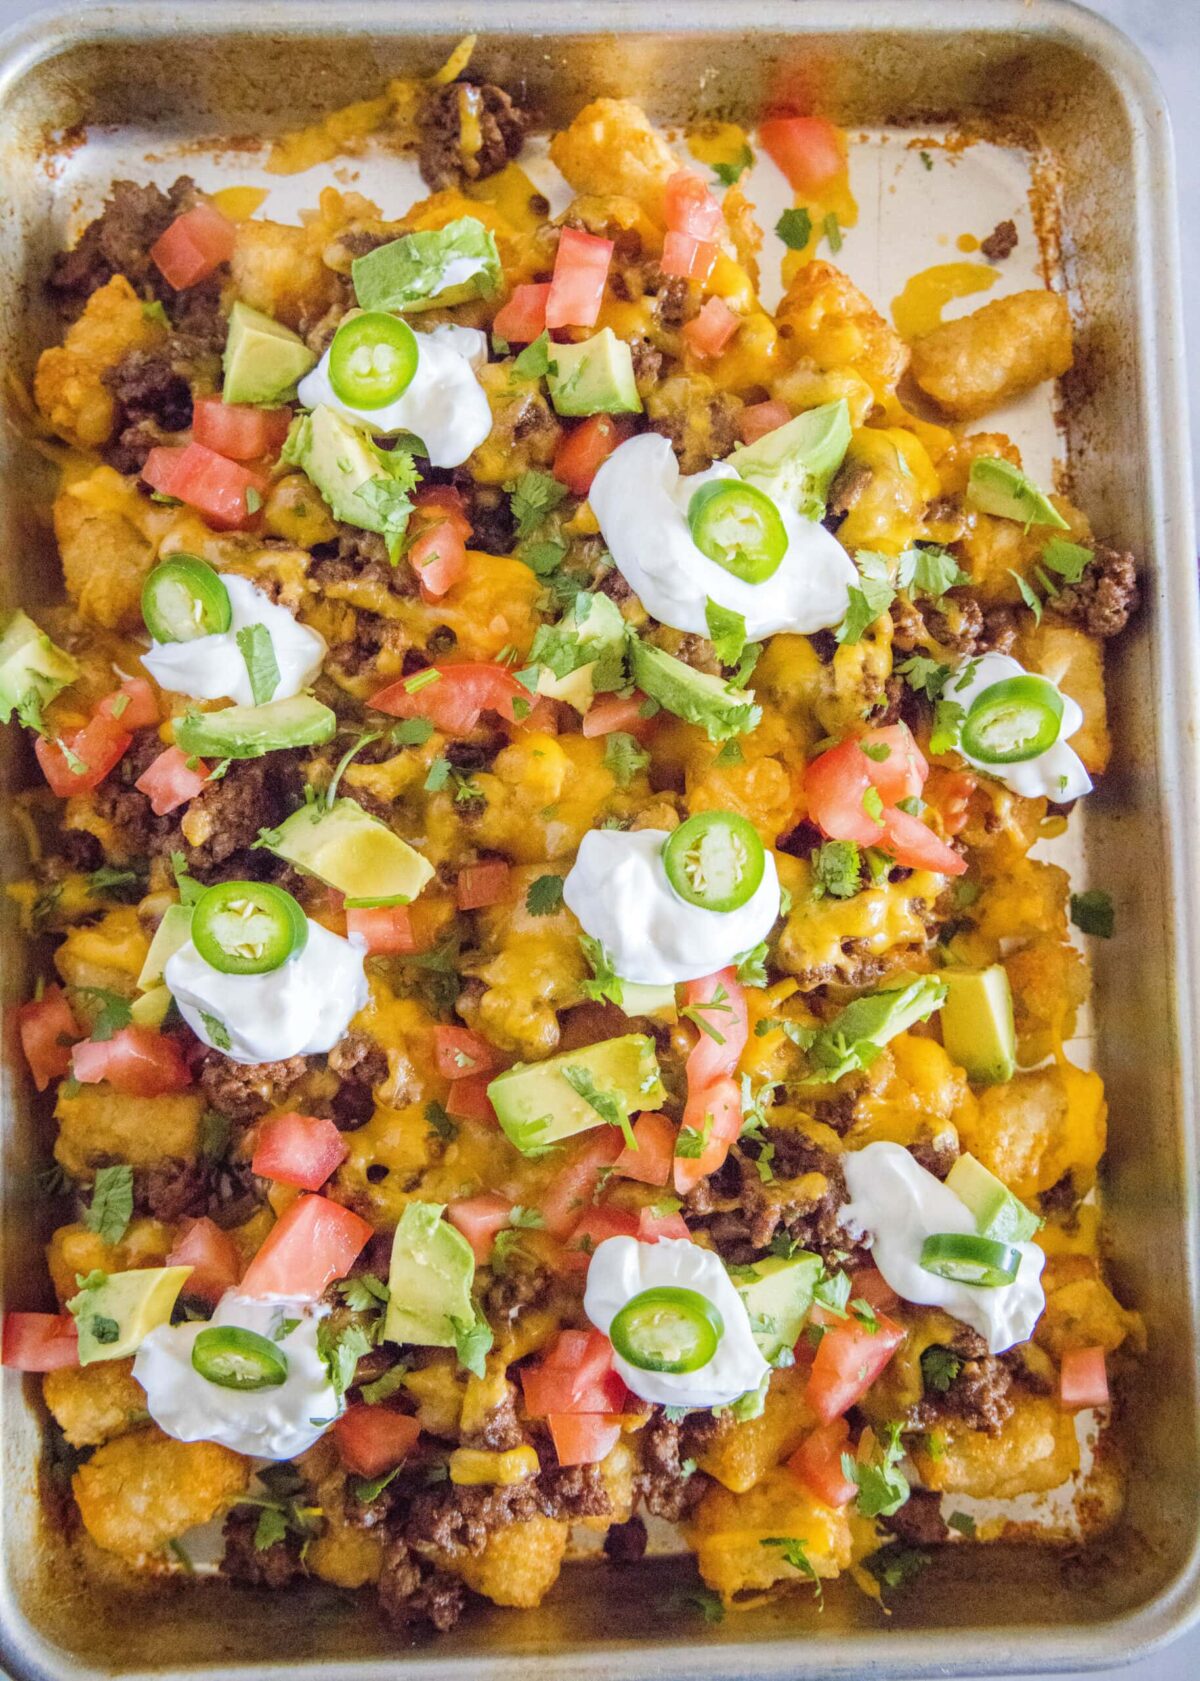 Overhead view of a full baking sheet filled with tater tot nachos, with sour cream, jalapeños, tomatoes, avocado, and cilantro on top